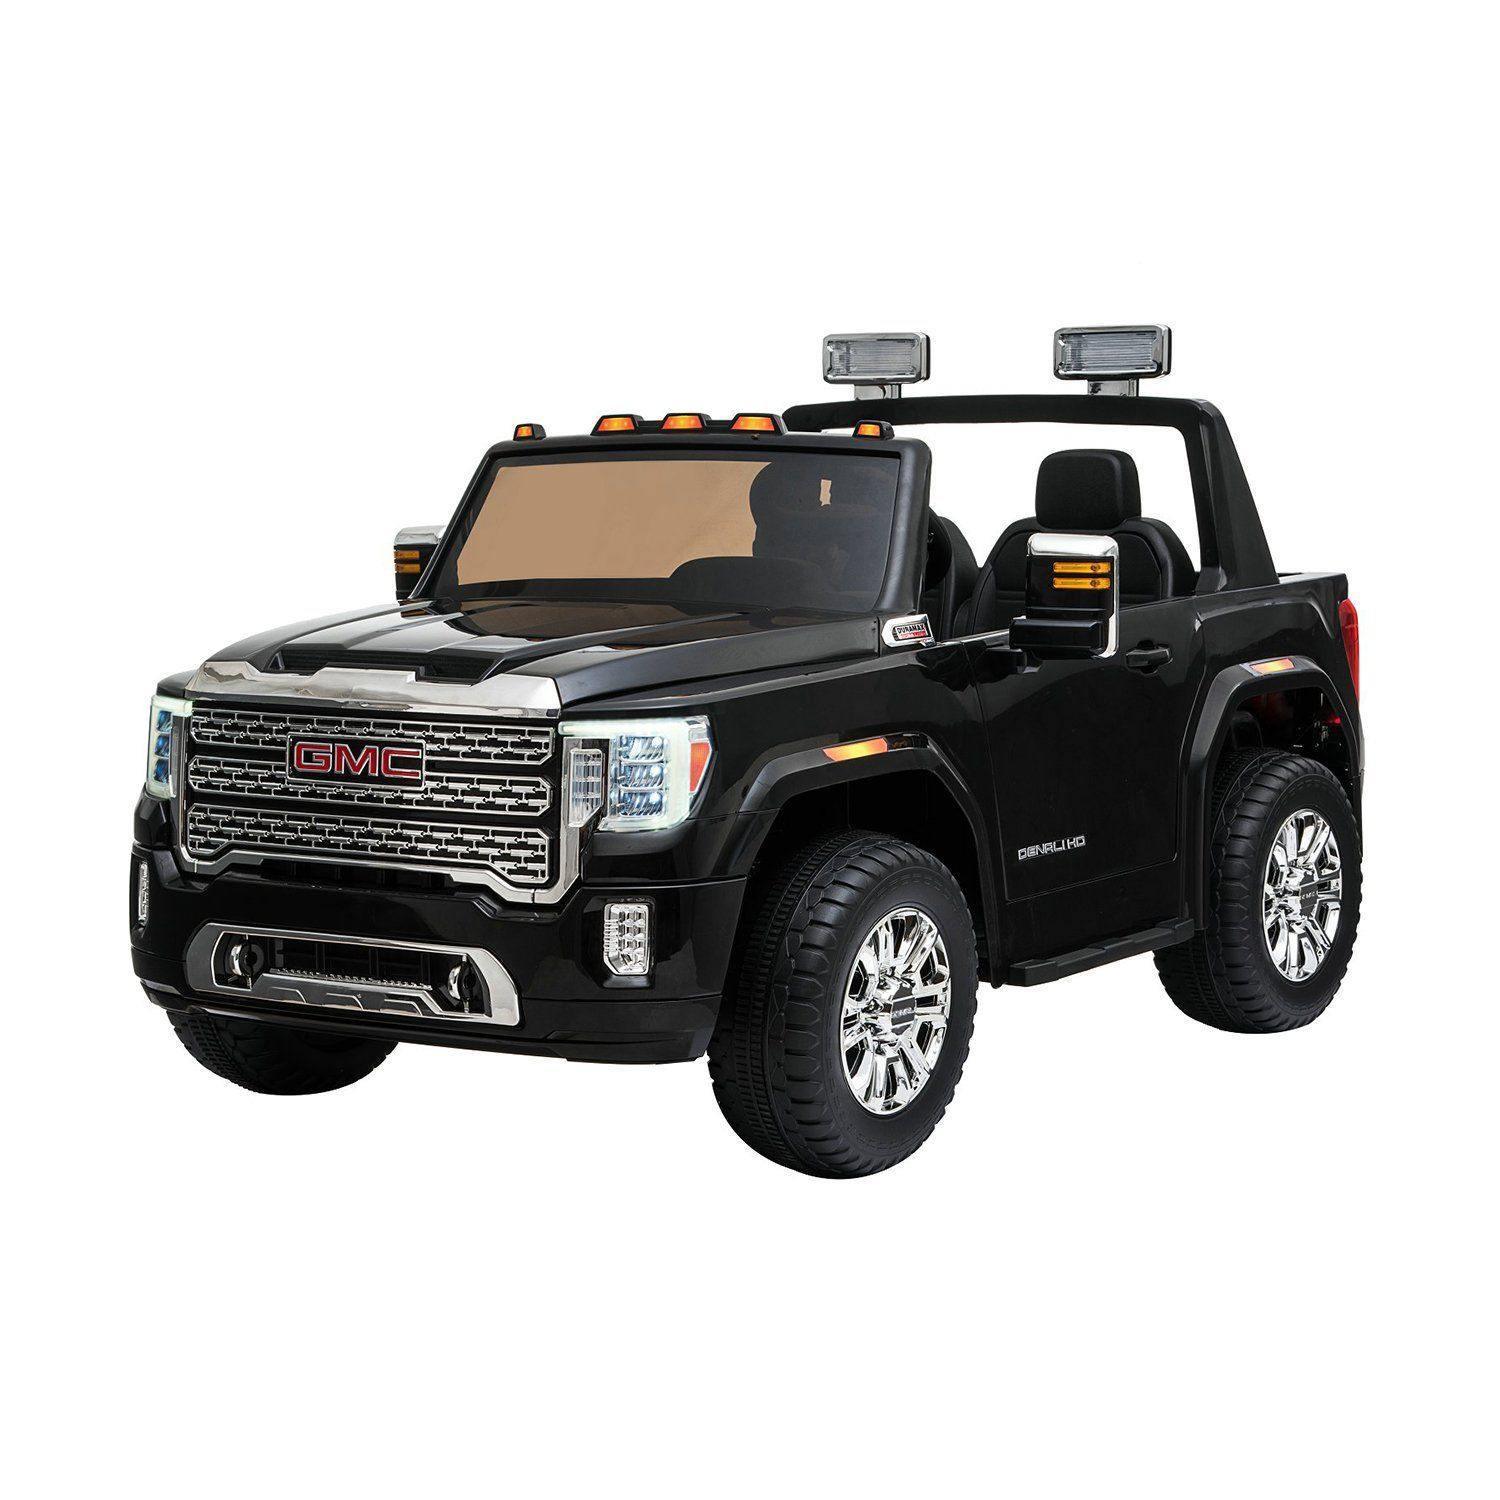 Licensed GMC Denali 12V Battery Operated 2 Seater Ride on Car With Parental Remote Control by Freddo - American Kids Cars